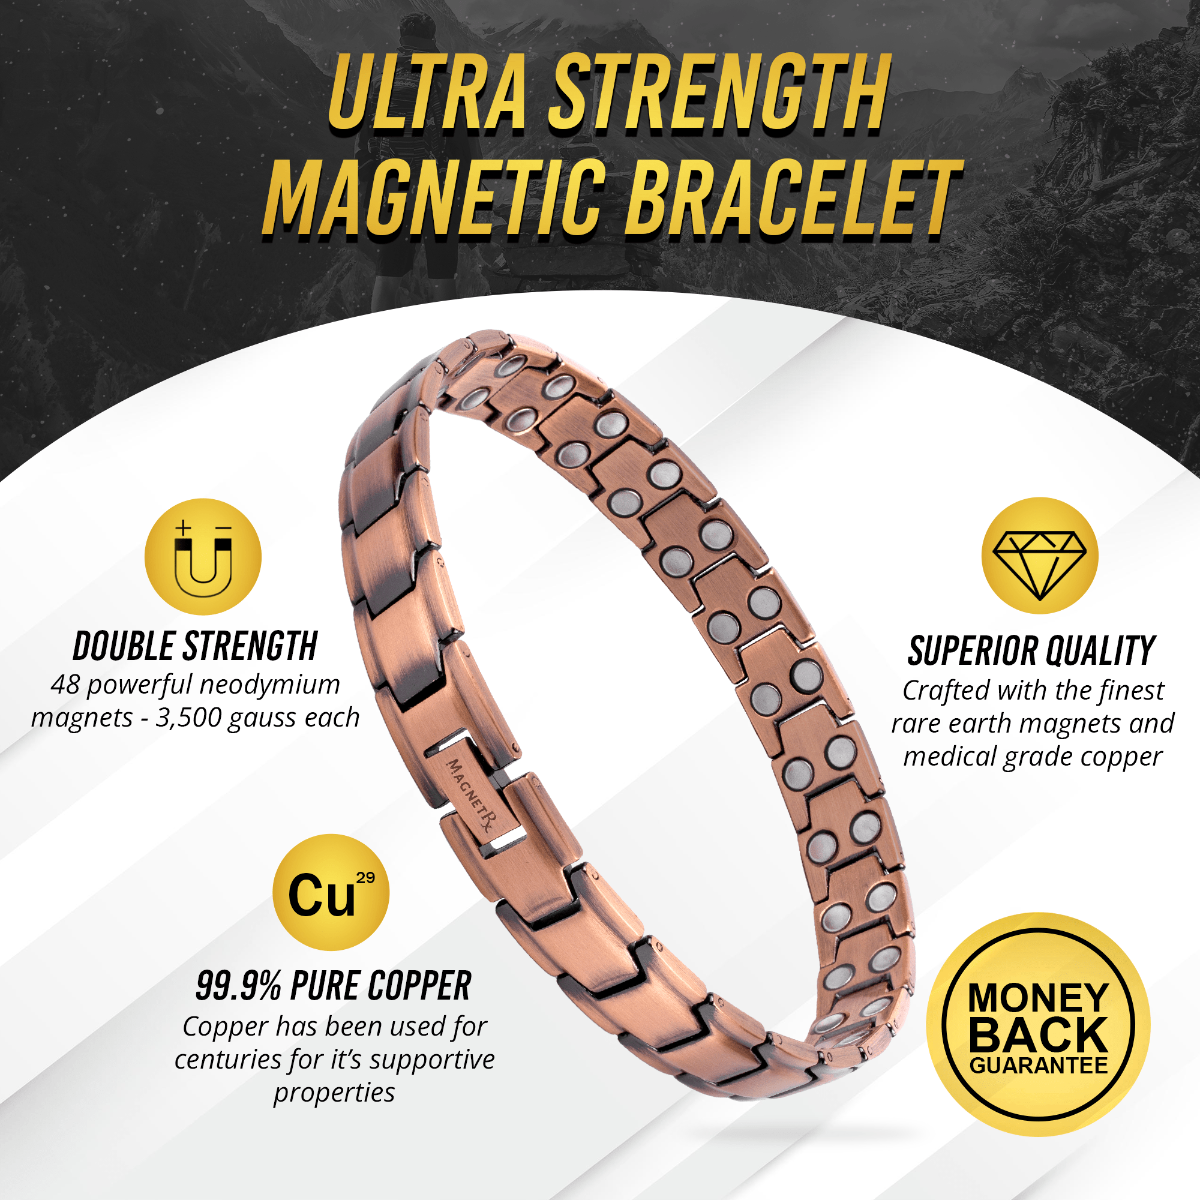 Ultra Strength Copper Magnetic Therapy Anklet for Women